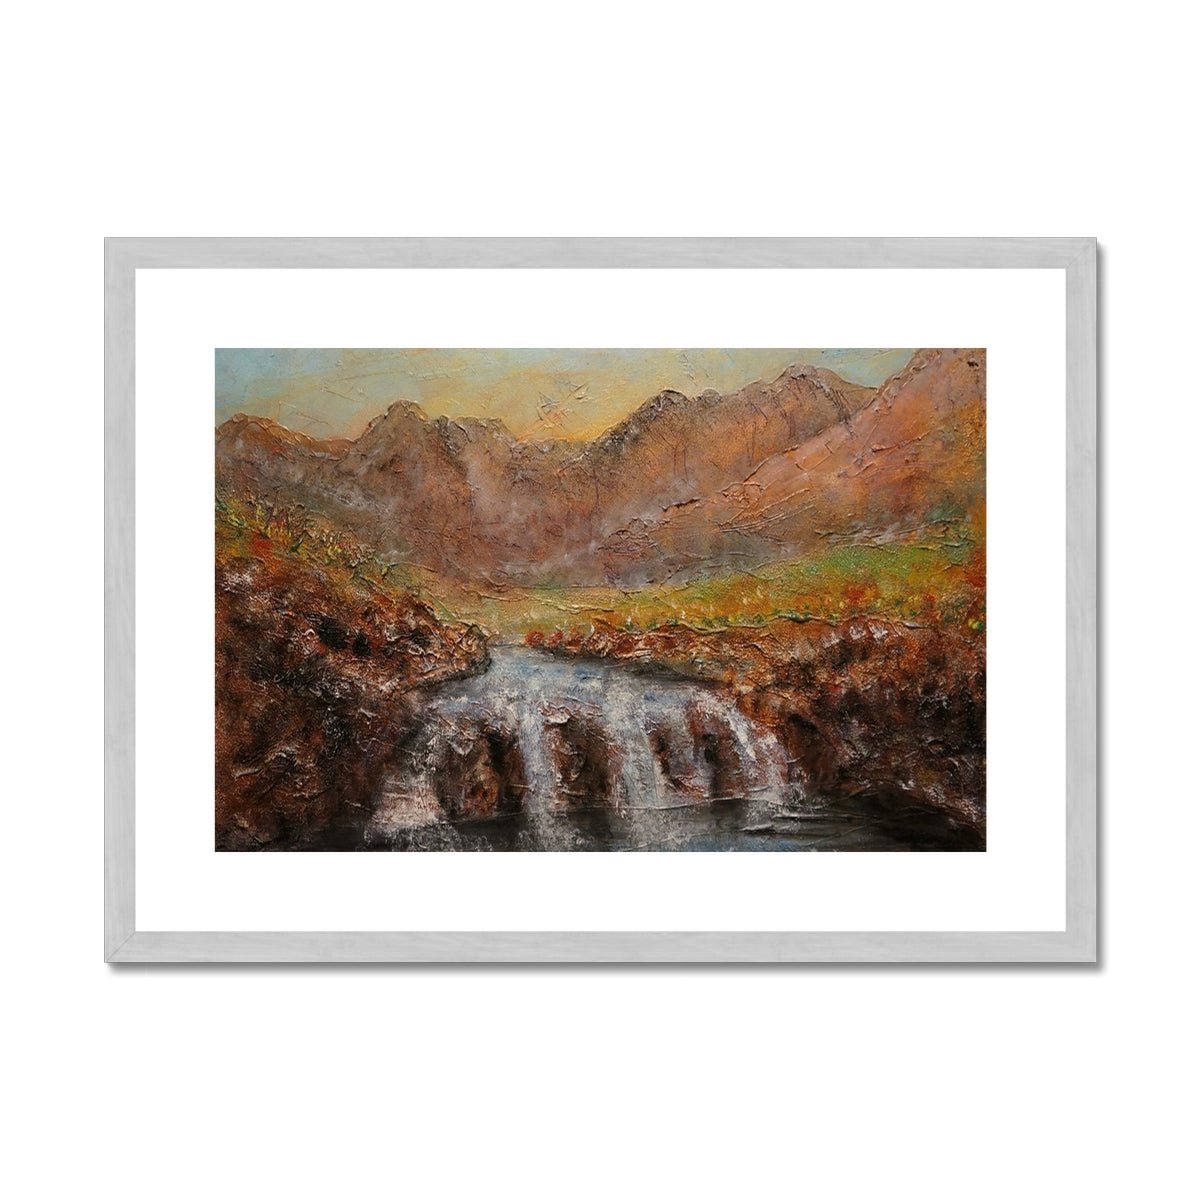 Fairy Pools Dawn Skye Painting | Antique Framed & Mounted Prints From Scotland-Antique Framed & Mounted Prints-Skye Art Gallery-A2 Landscape-Silver Frame-Paintings, Prints, Homeware, Art Gifts From Scotland By Scottish Artist Kevin Hunter